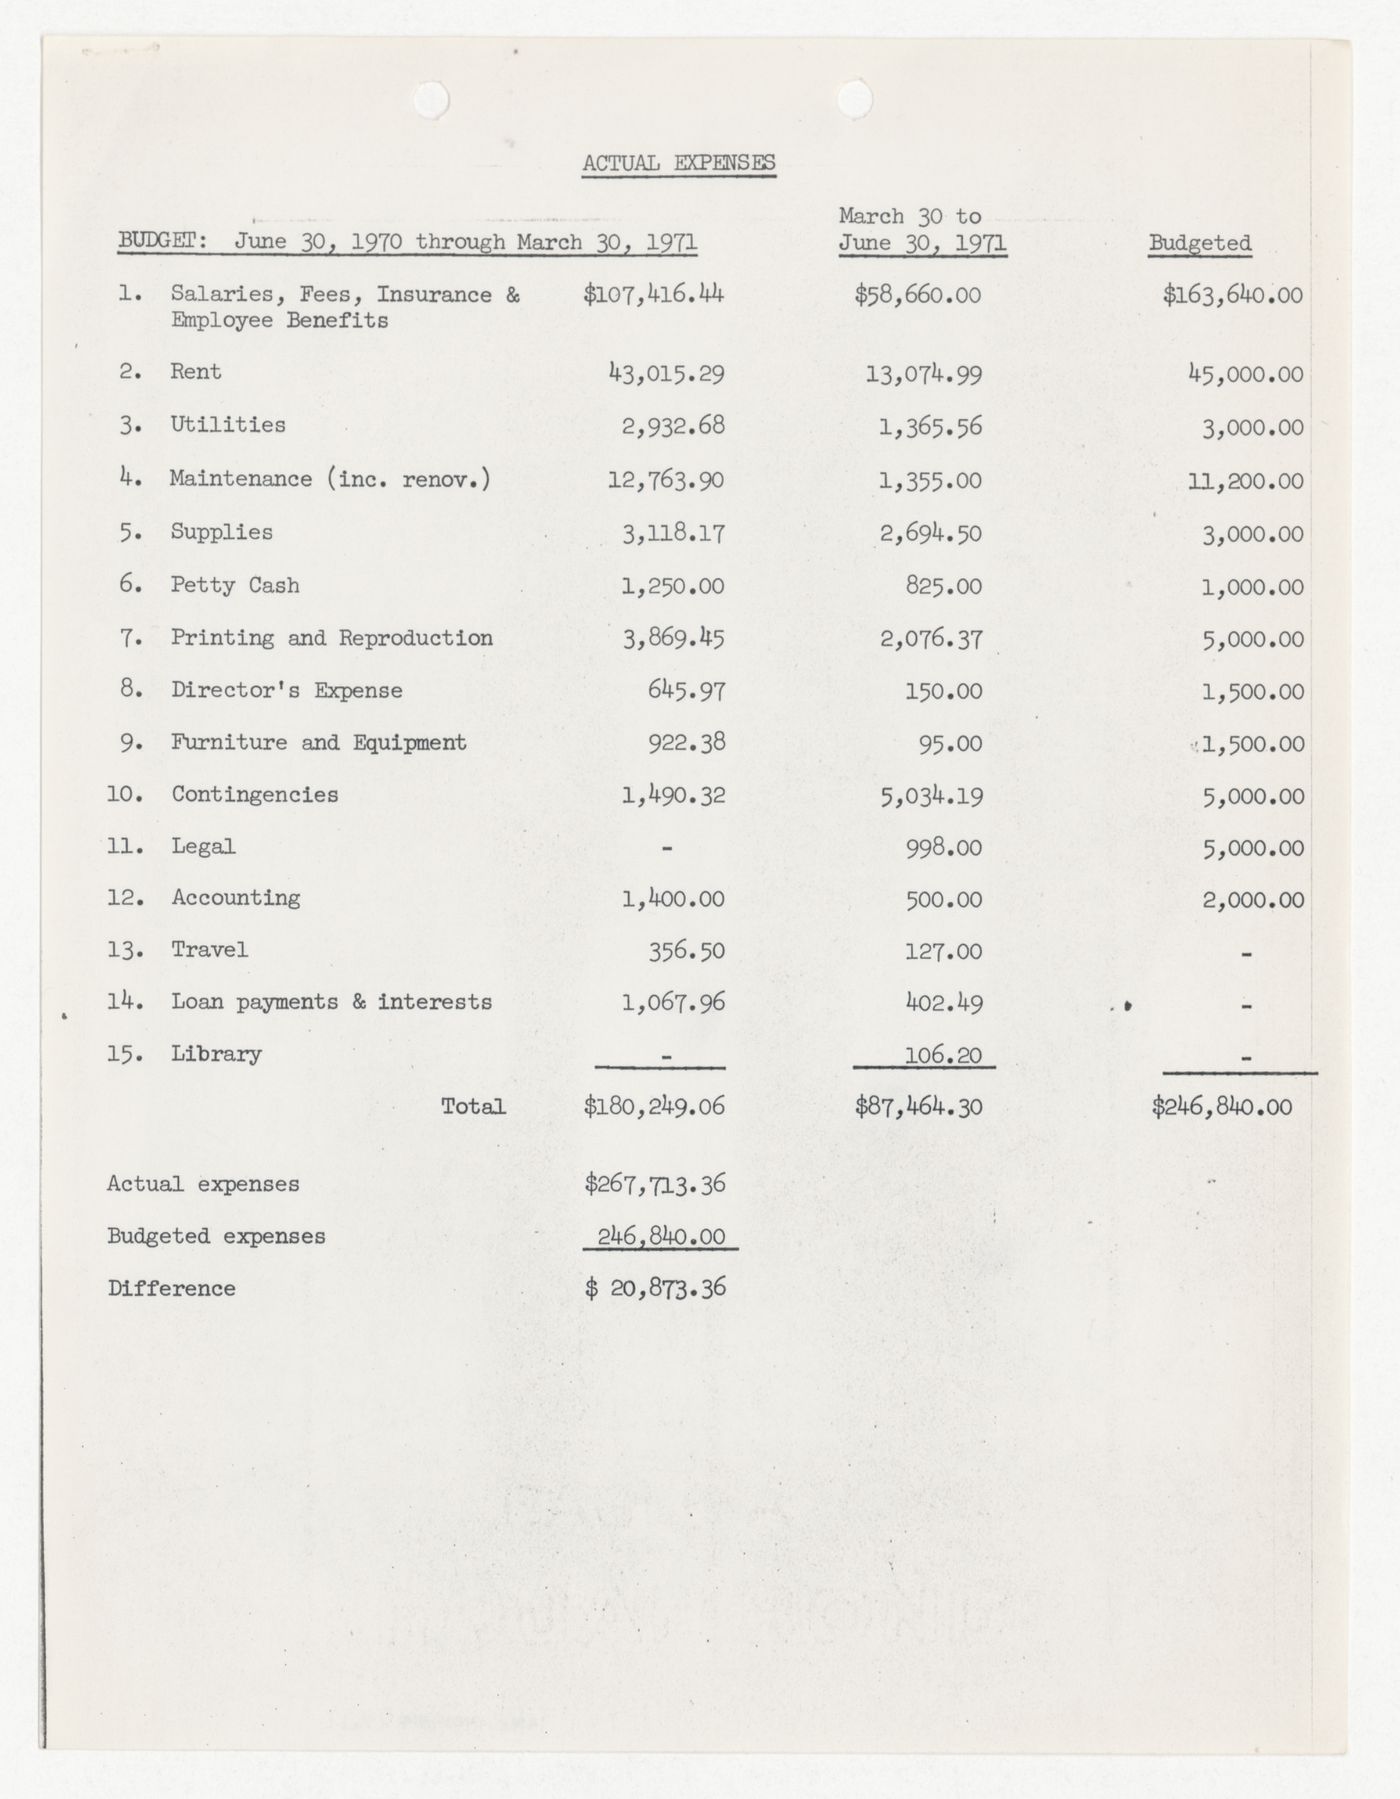 Actual expenses and income from March 30th to June 30th, 1971 with information for financial year 1970-1971